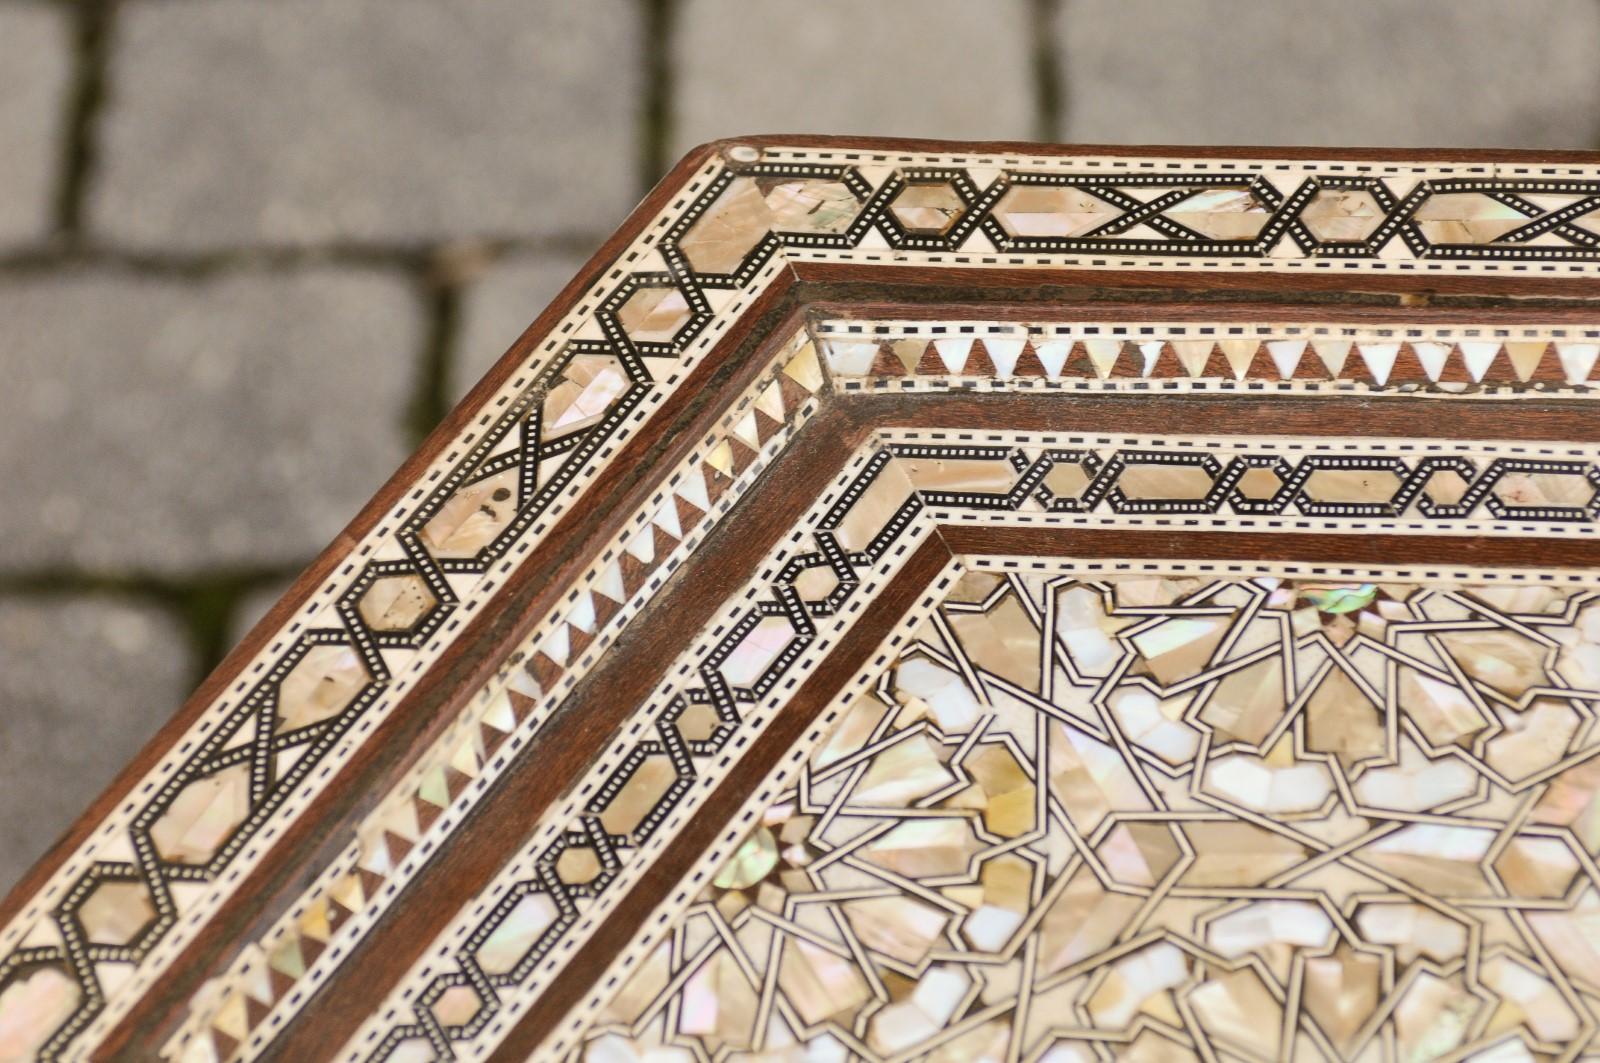 Moorish Style Syrian Hexagonal Side Tables with Mother of Pearl and Bone Inlay 11